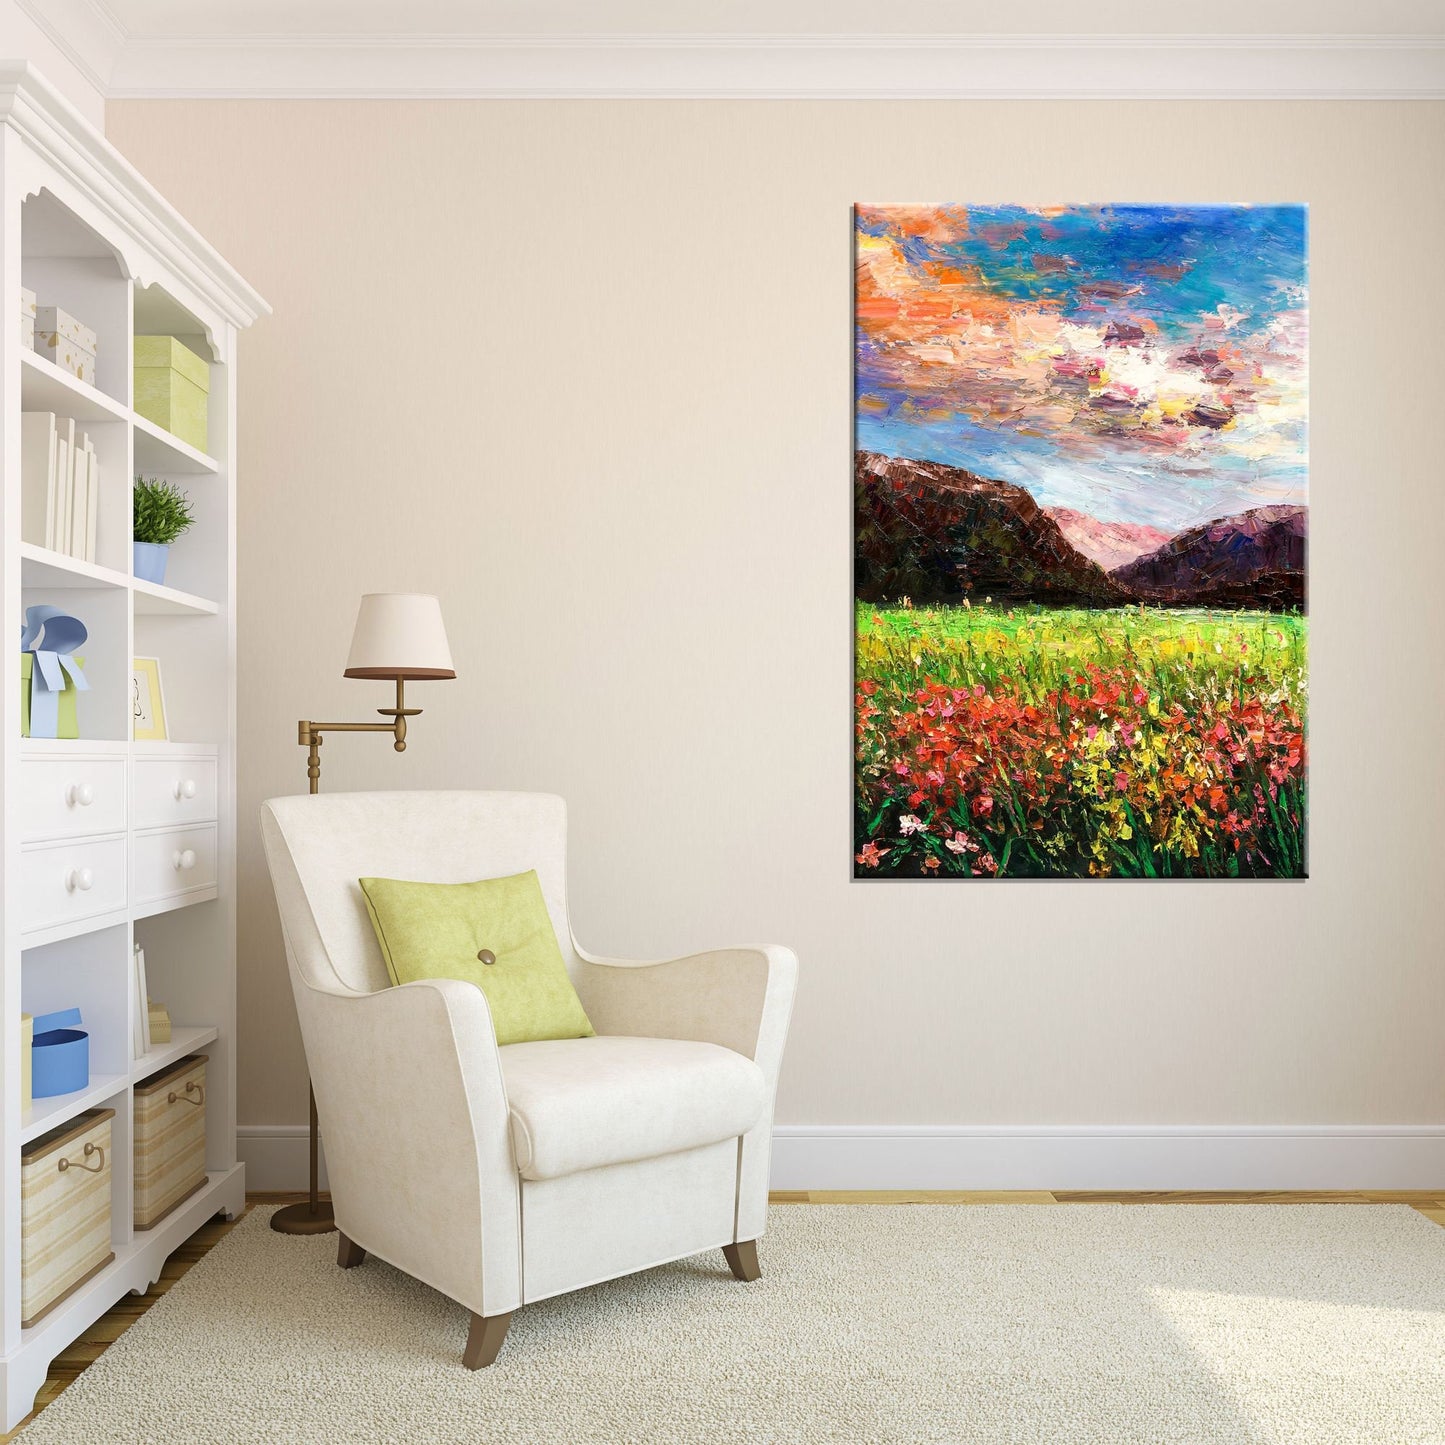 Oil Painting Spring Landscape with Hills and Flowers, Oil Painting Original, Canvas Painting, Landscape Painting, Large Wall Art Painting